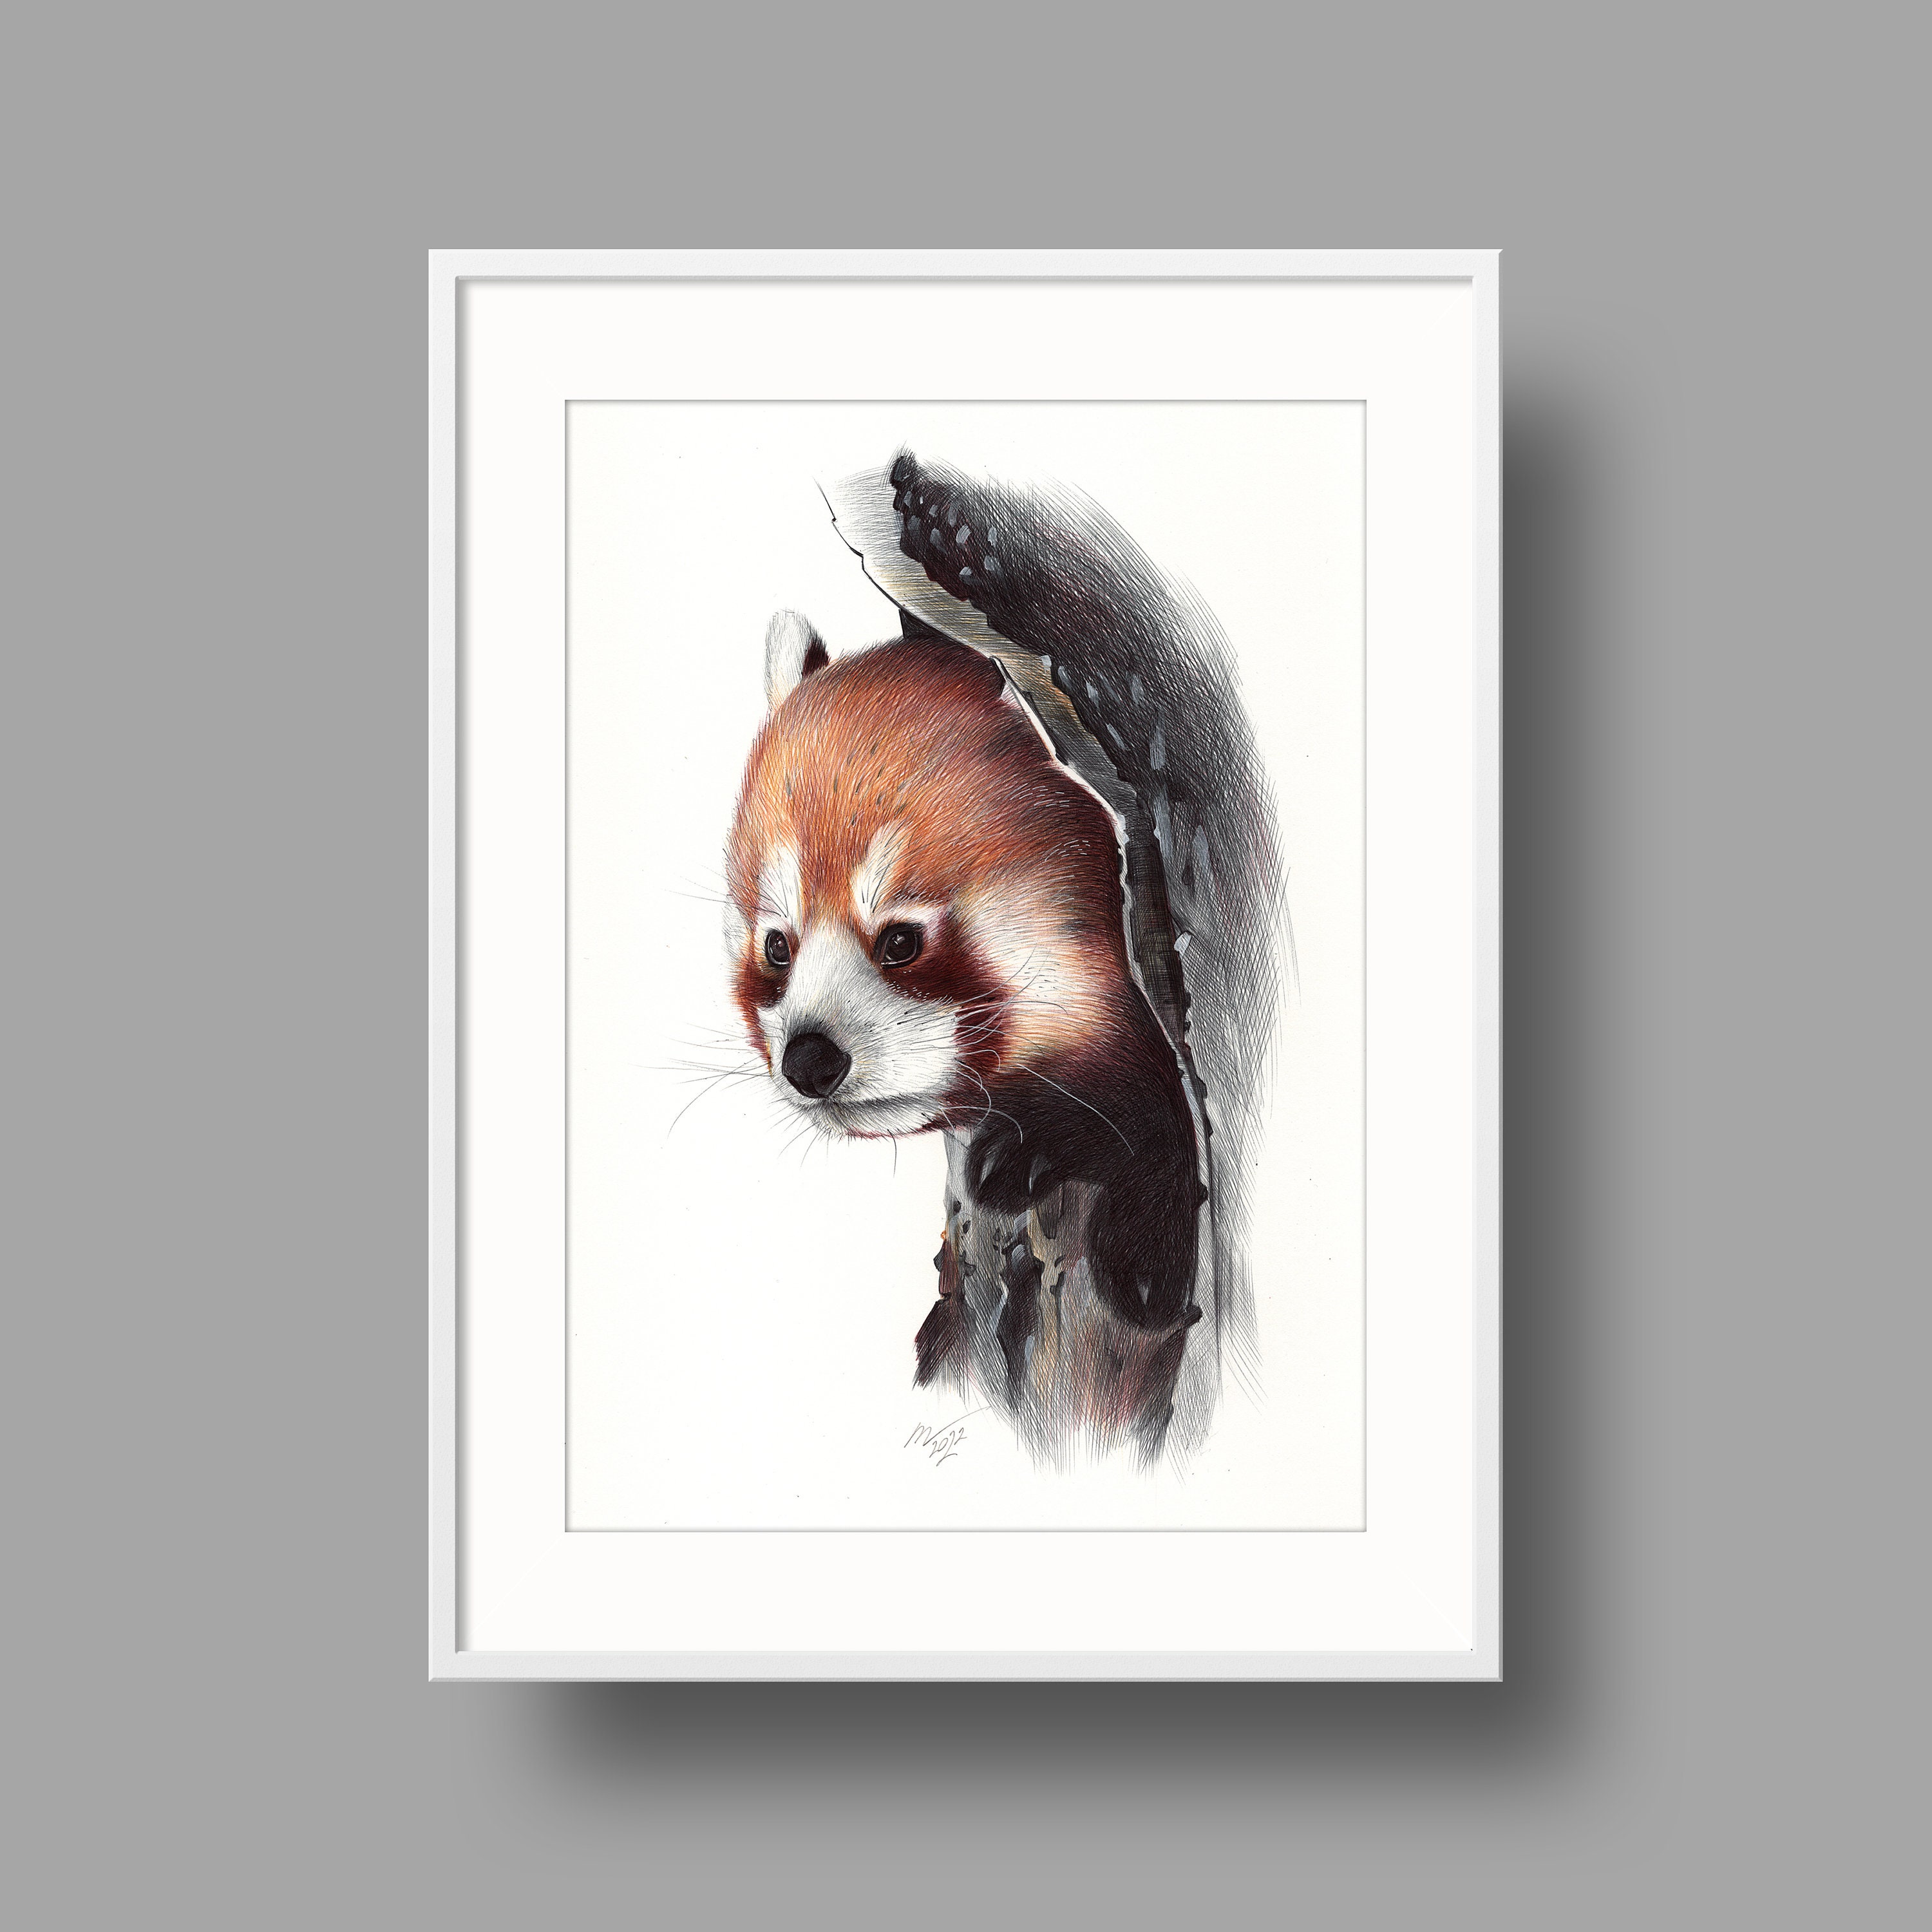 Pen with light - Red panda